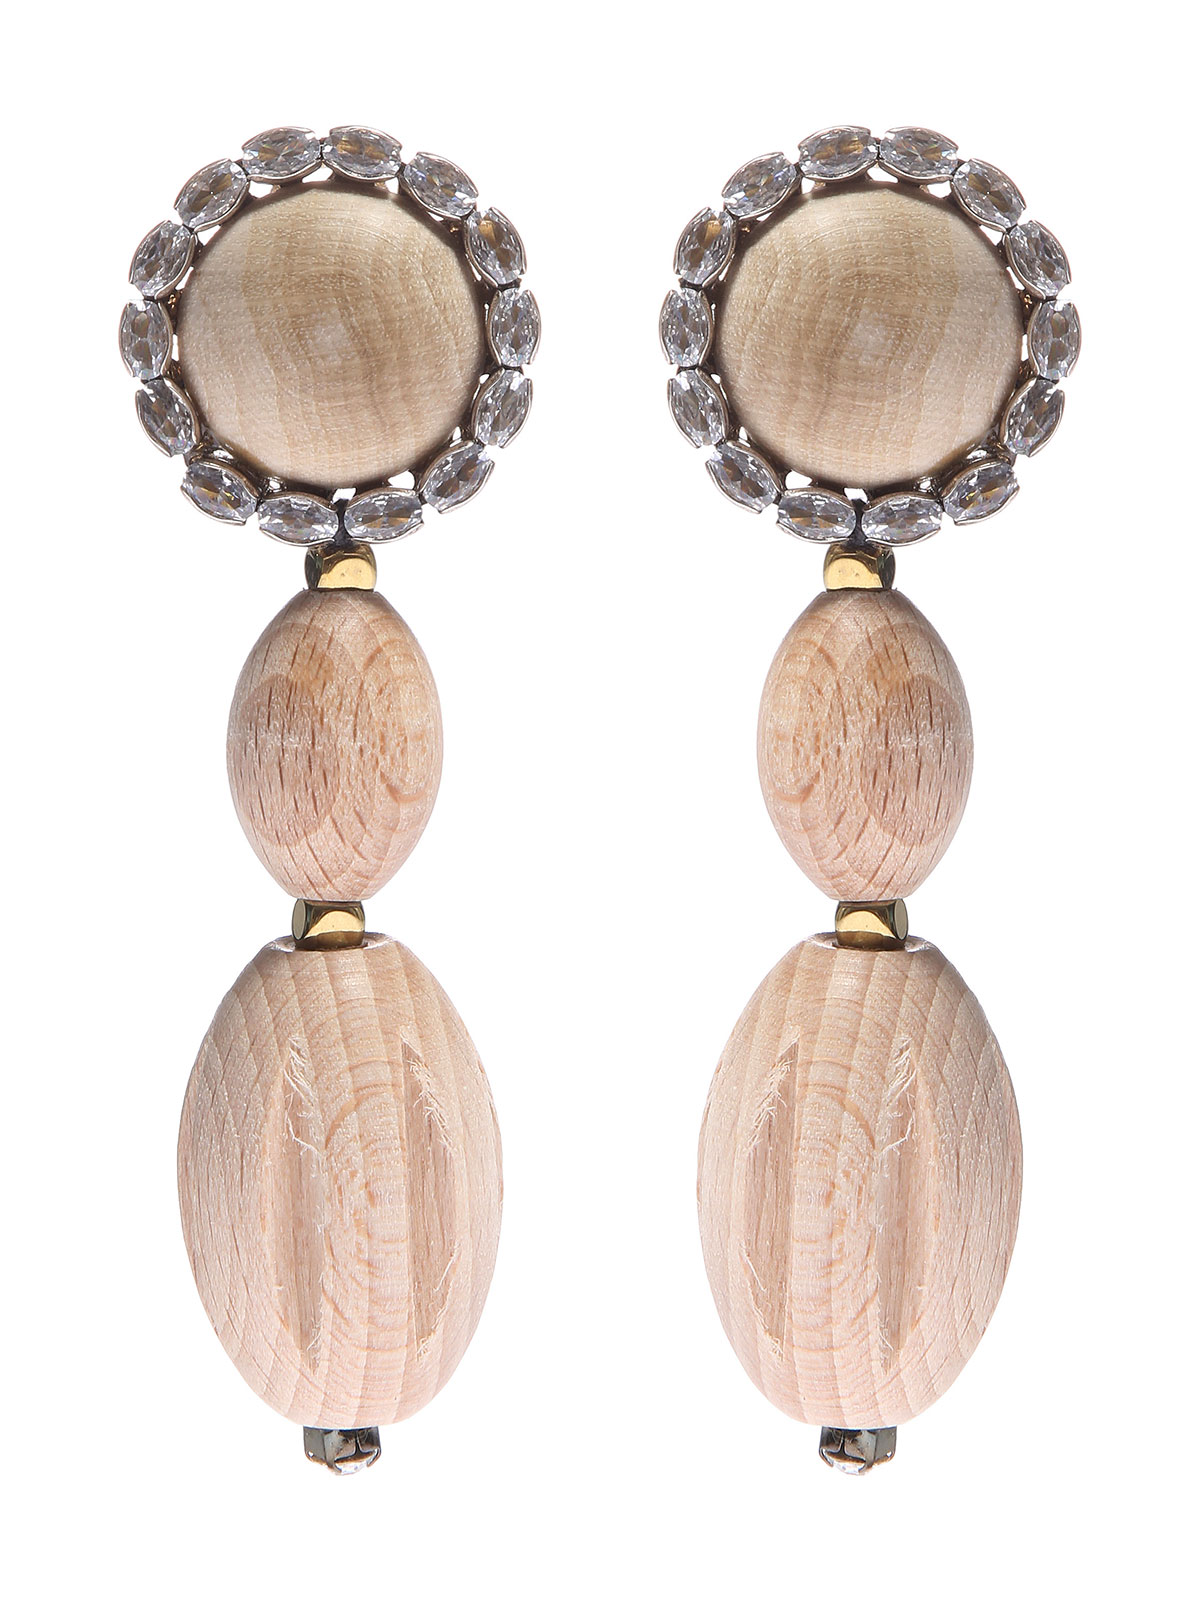 Wood cabochon earrings with crystals and pendent wood elements 